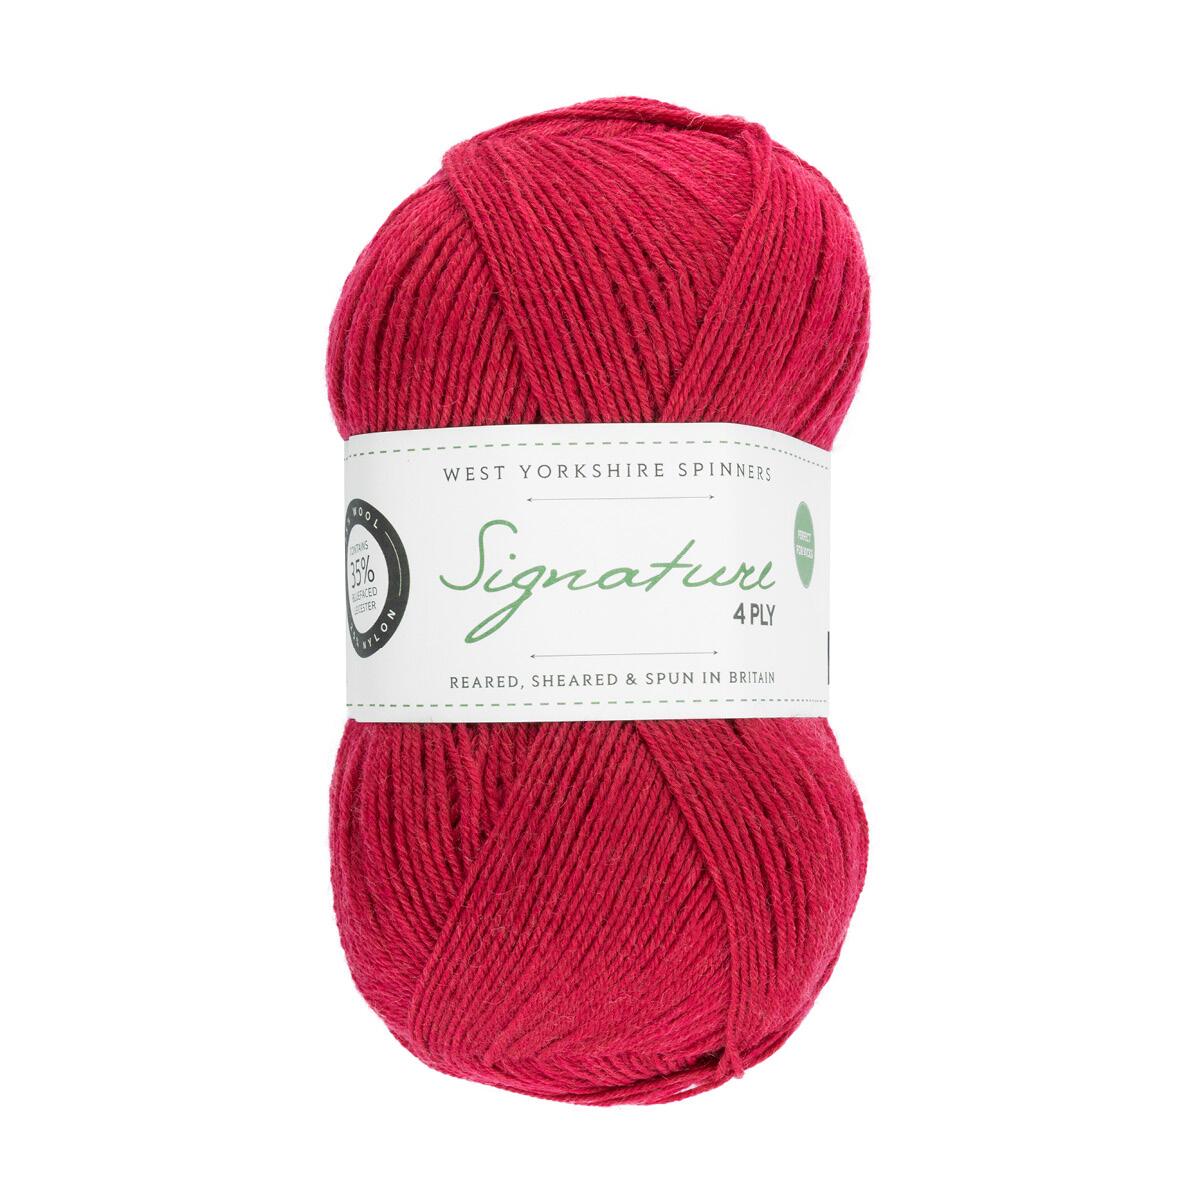 West Yorkshire Spinners Signature 4ply Unis 100g Farbe: 529 Cherry Drop